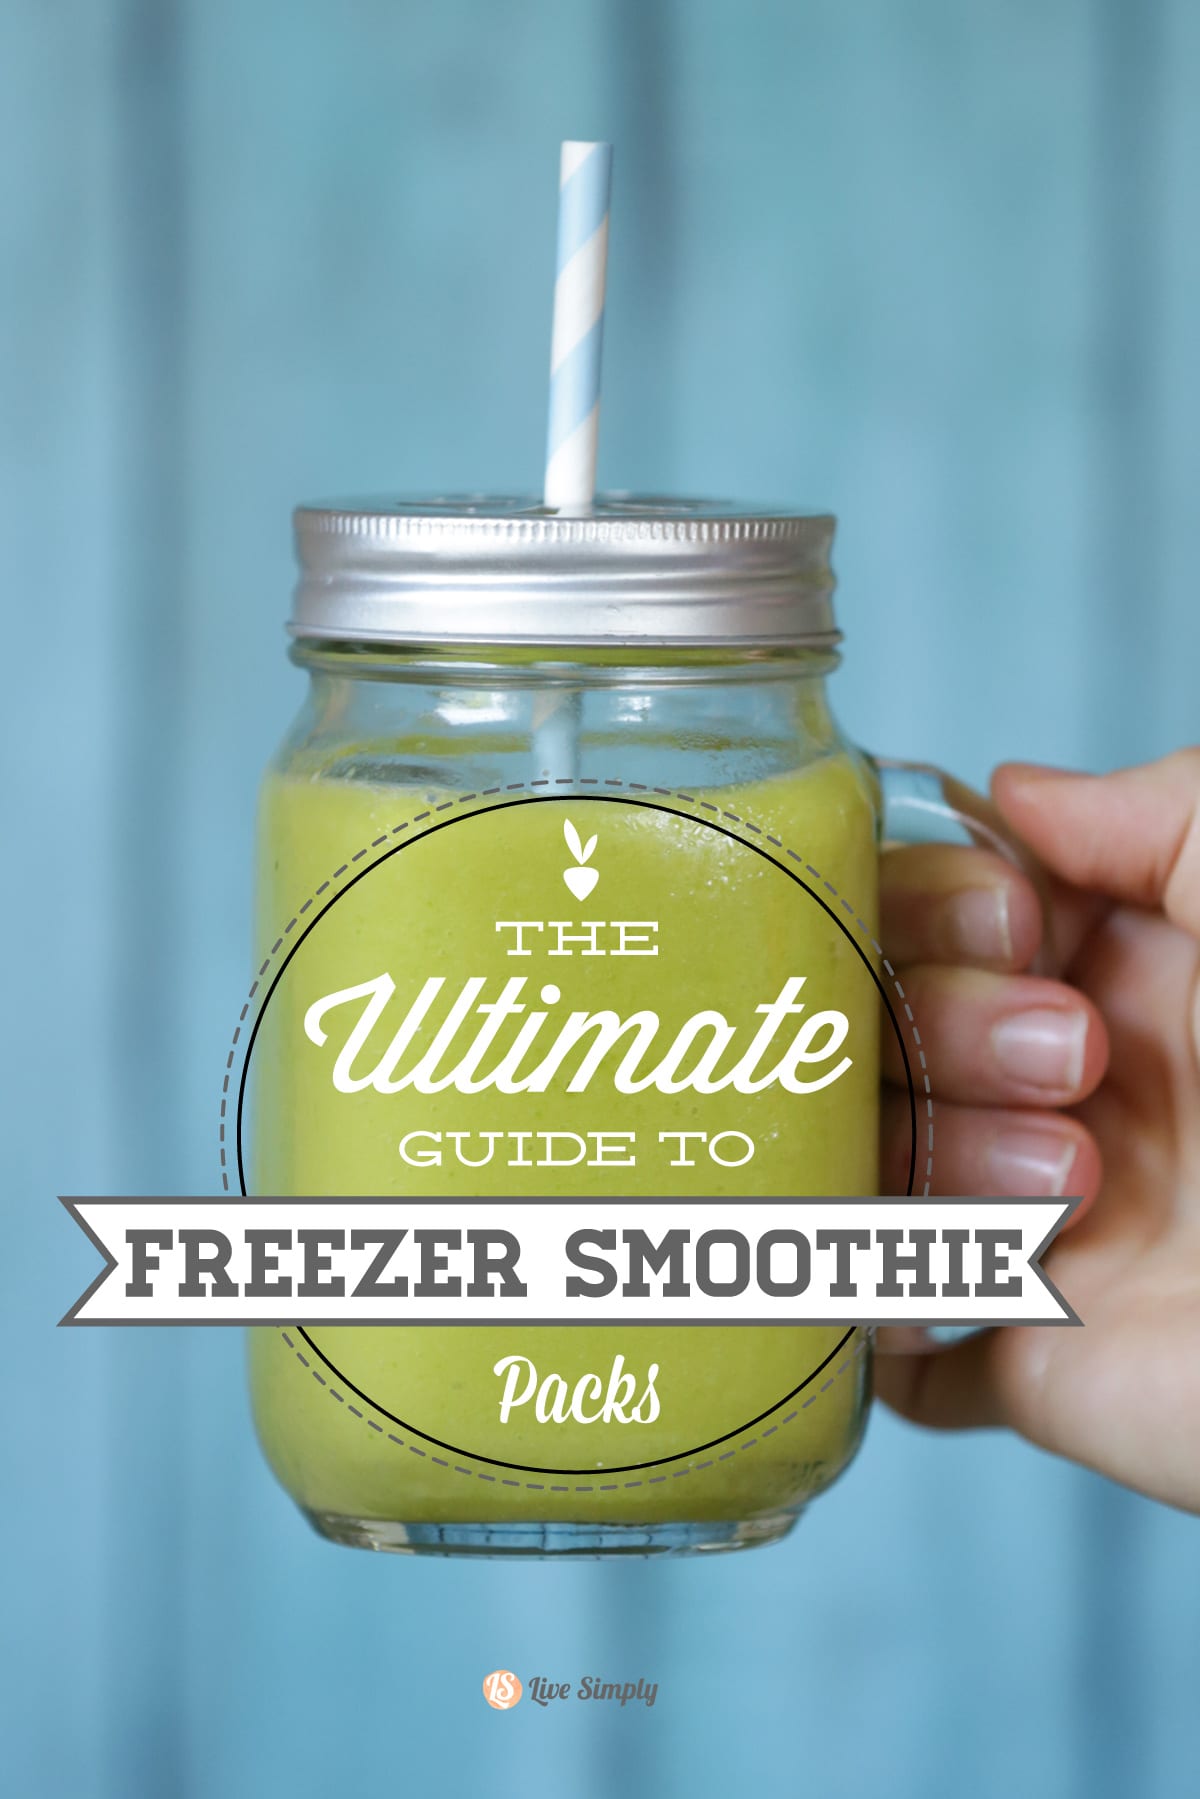 The Ultimate Guide to the creating make ahead freezer smoothie packs. Make an entire week or even month of smoothie packs in just minutes.